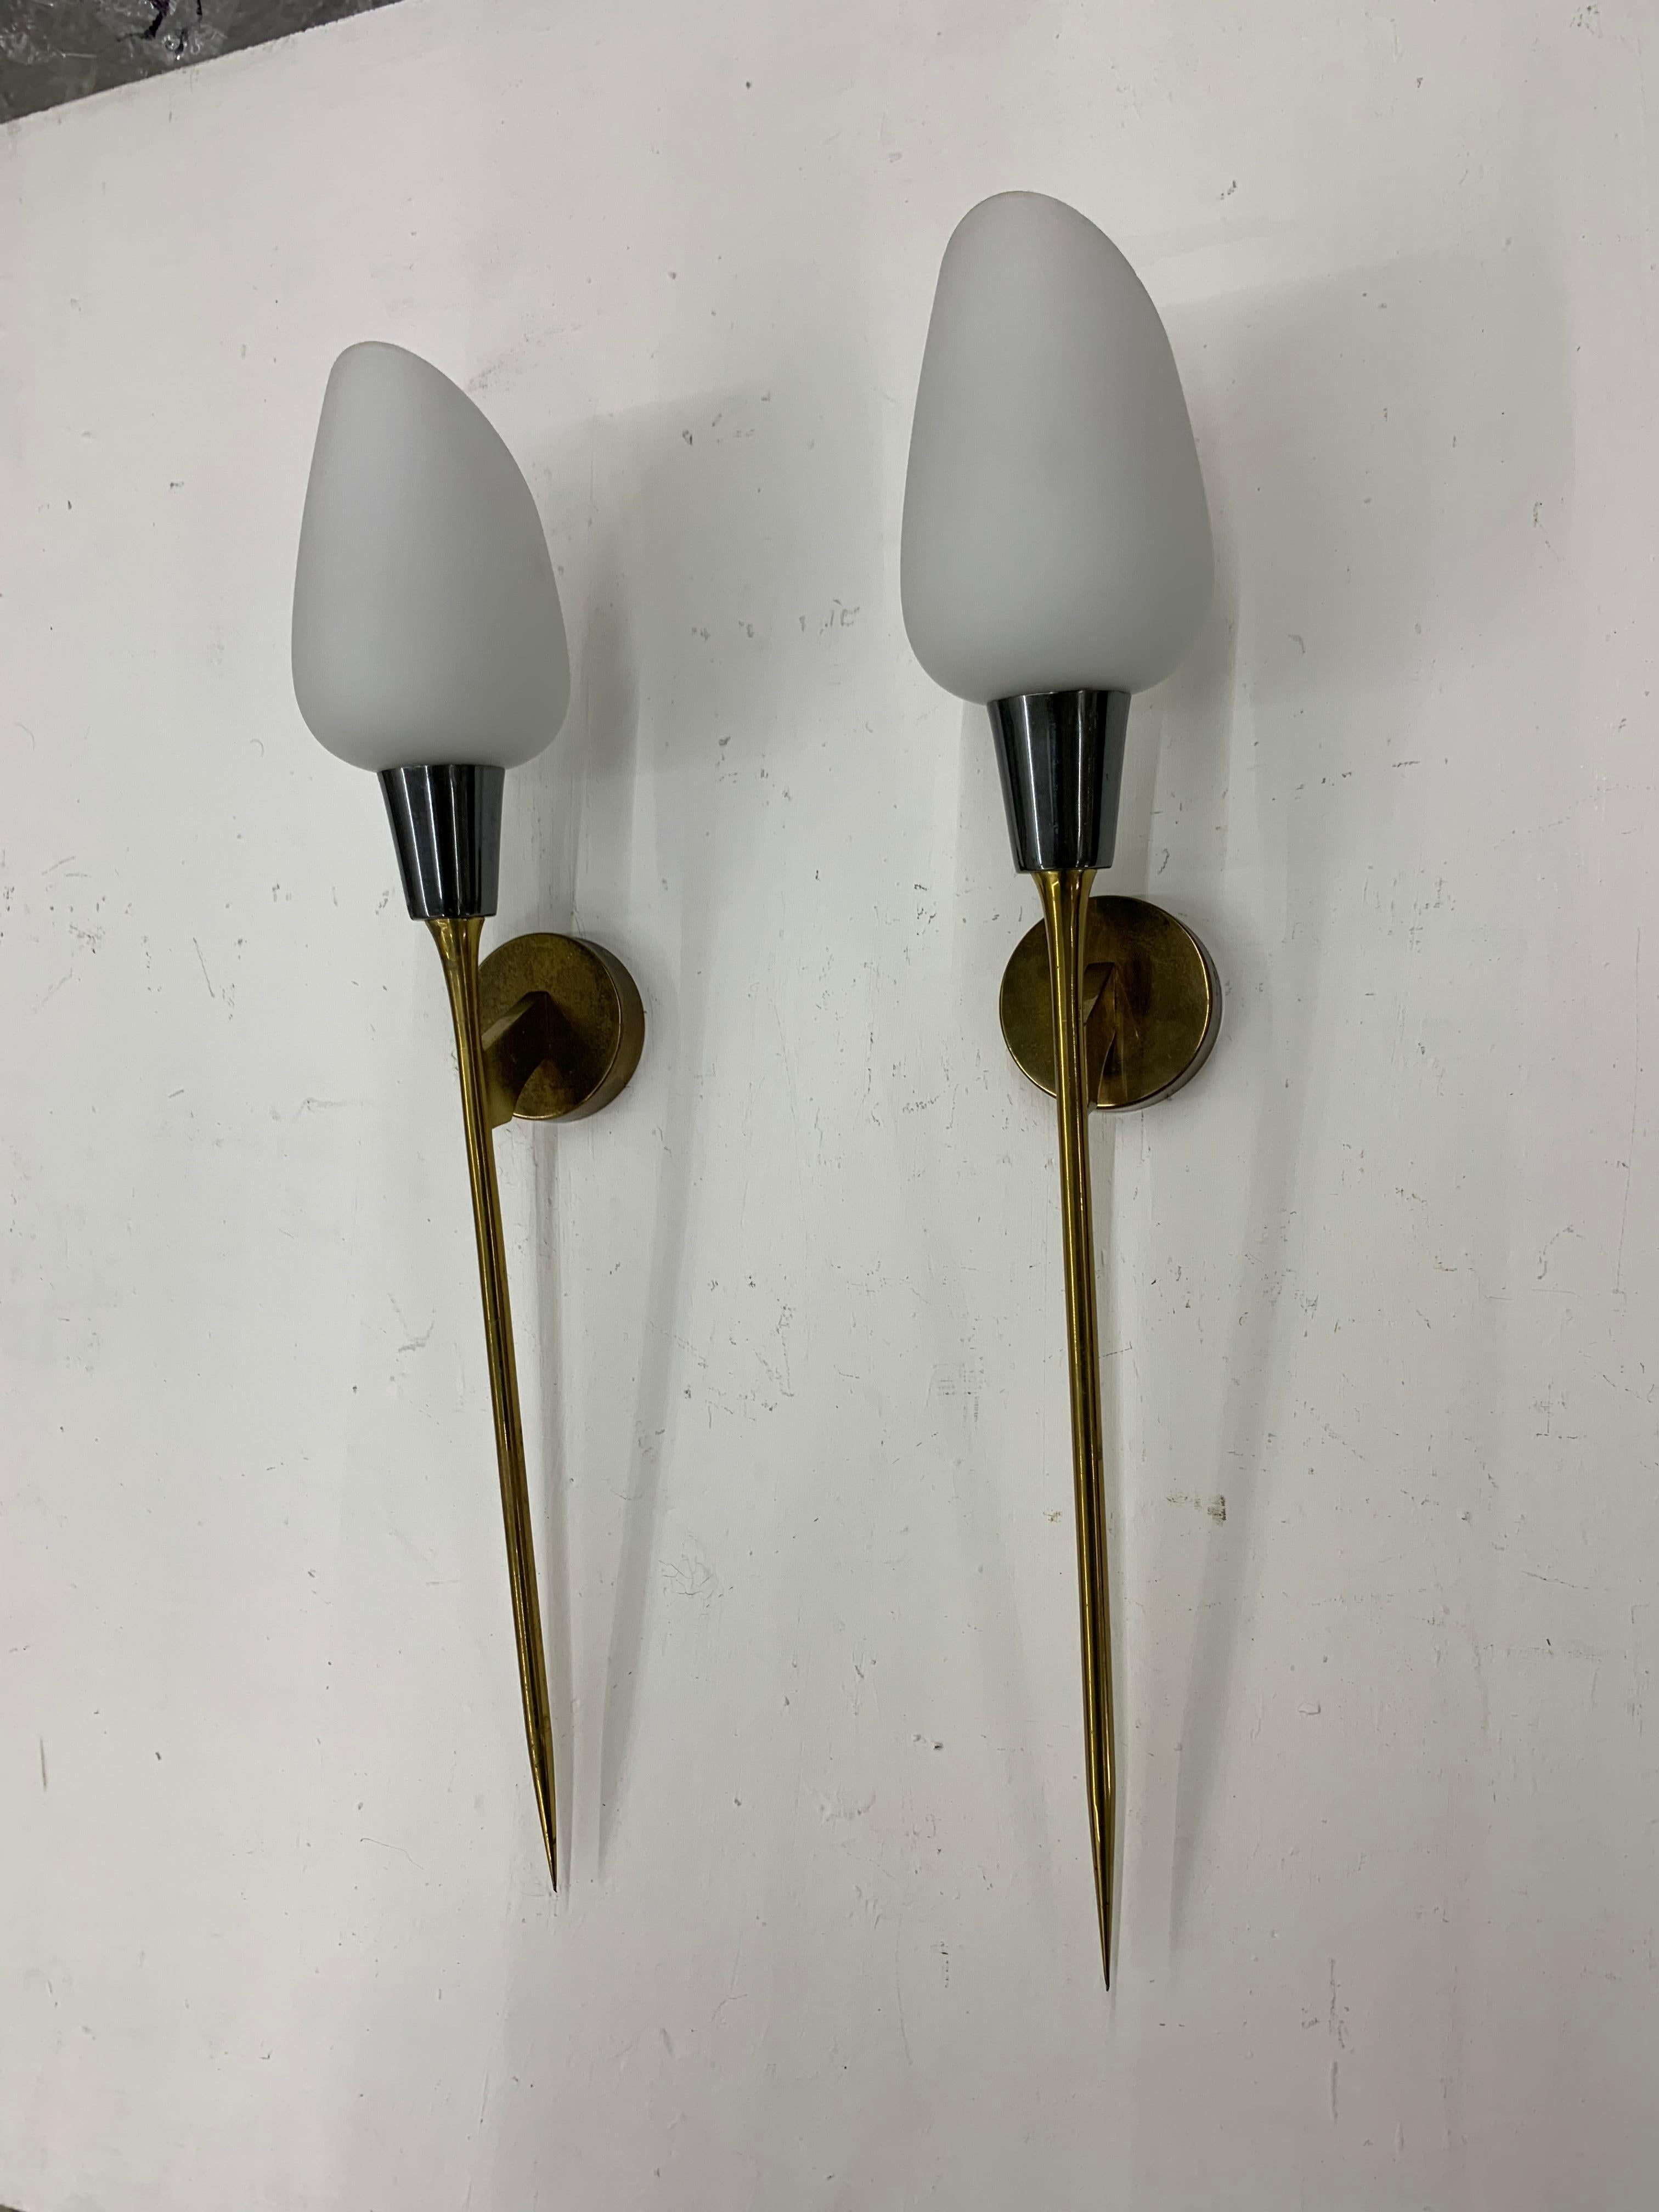 Polished Pair of Modernist Sconces attr Maison Arlus in Brass and Opaline Glass, France